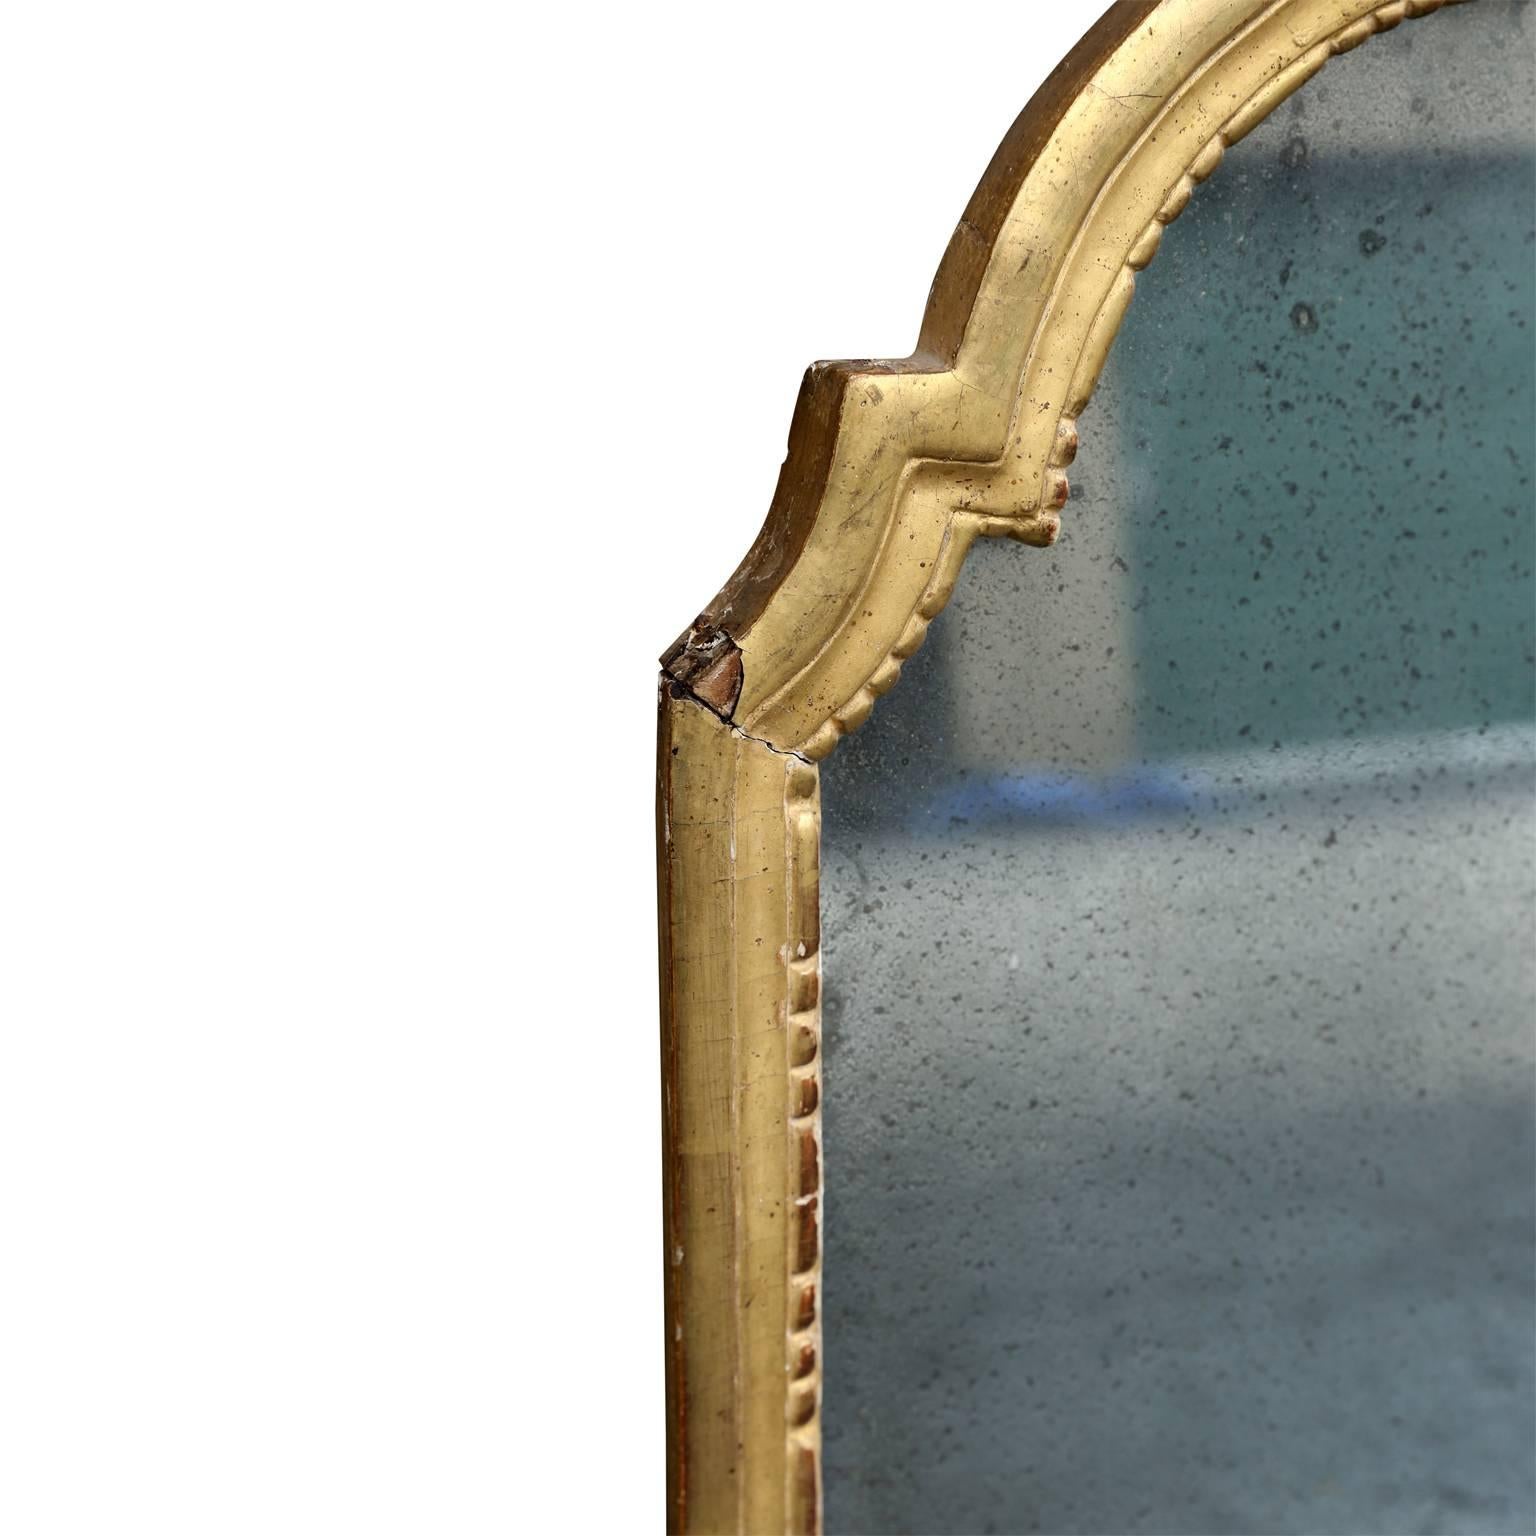 Petite arched-top mirror (18th century French). Carved gildwood frame containing original - or very old - mirror. Mirror features a liberal amount of subtle, attractive spotting from age.